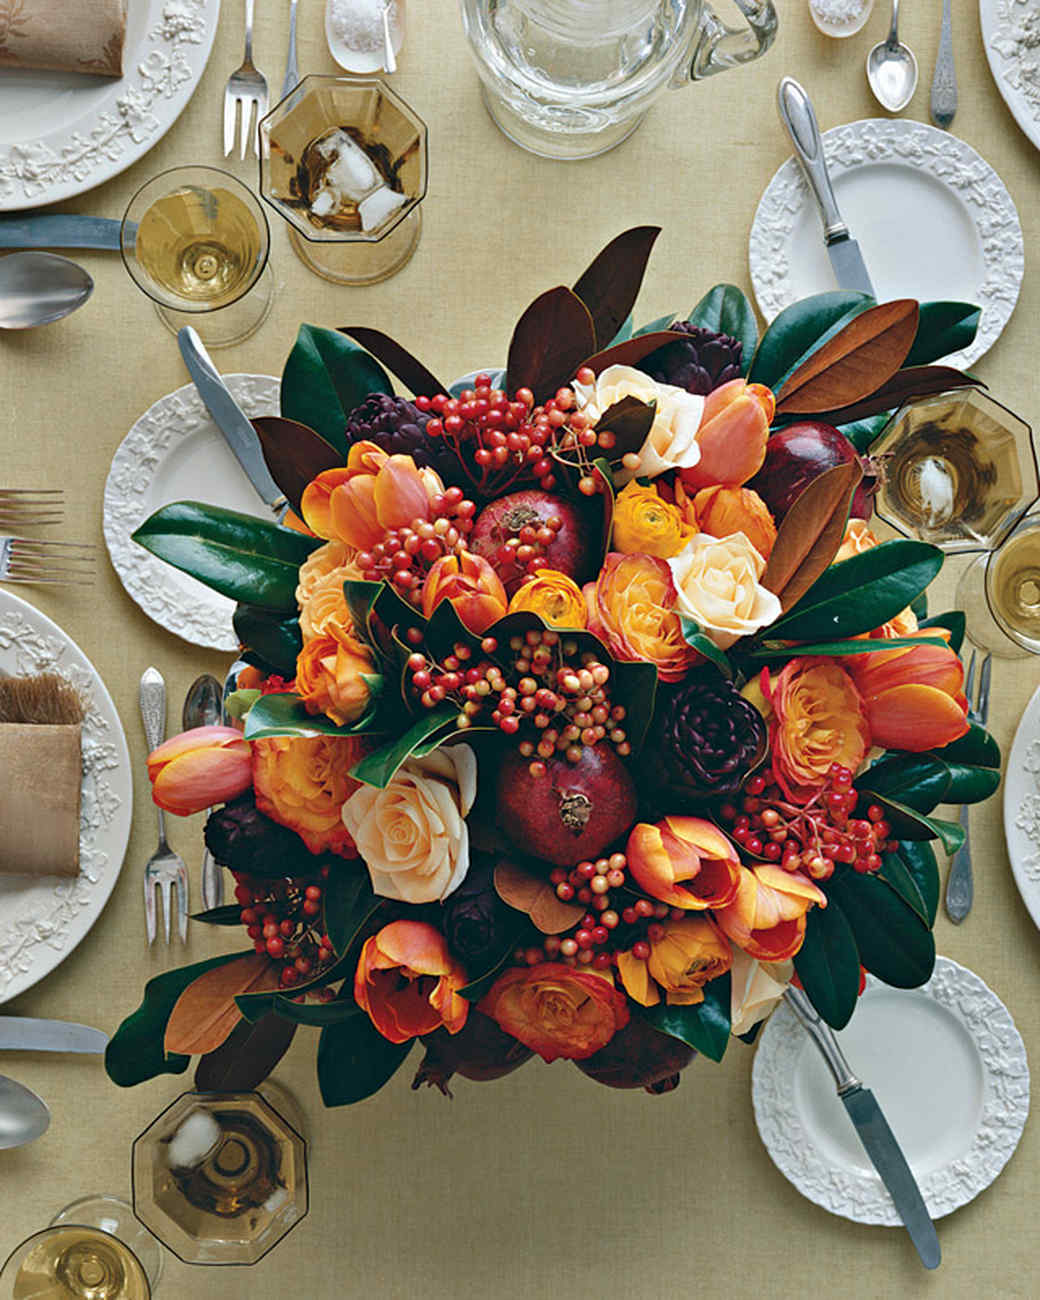 DIY bright centerpiece with pomegranates, tulips and roses